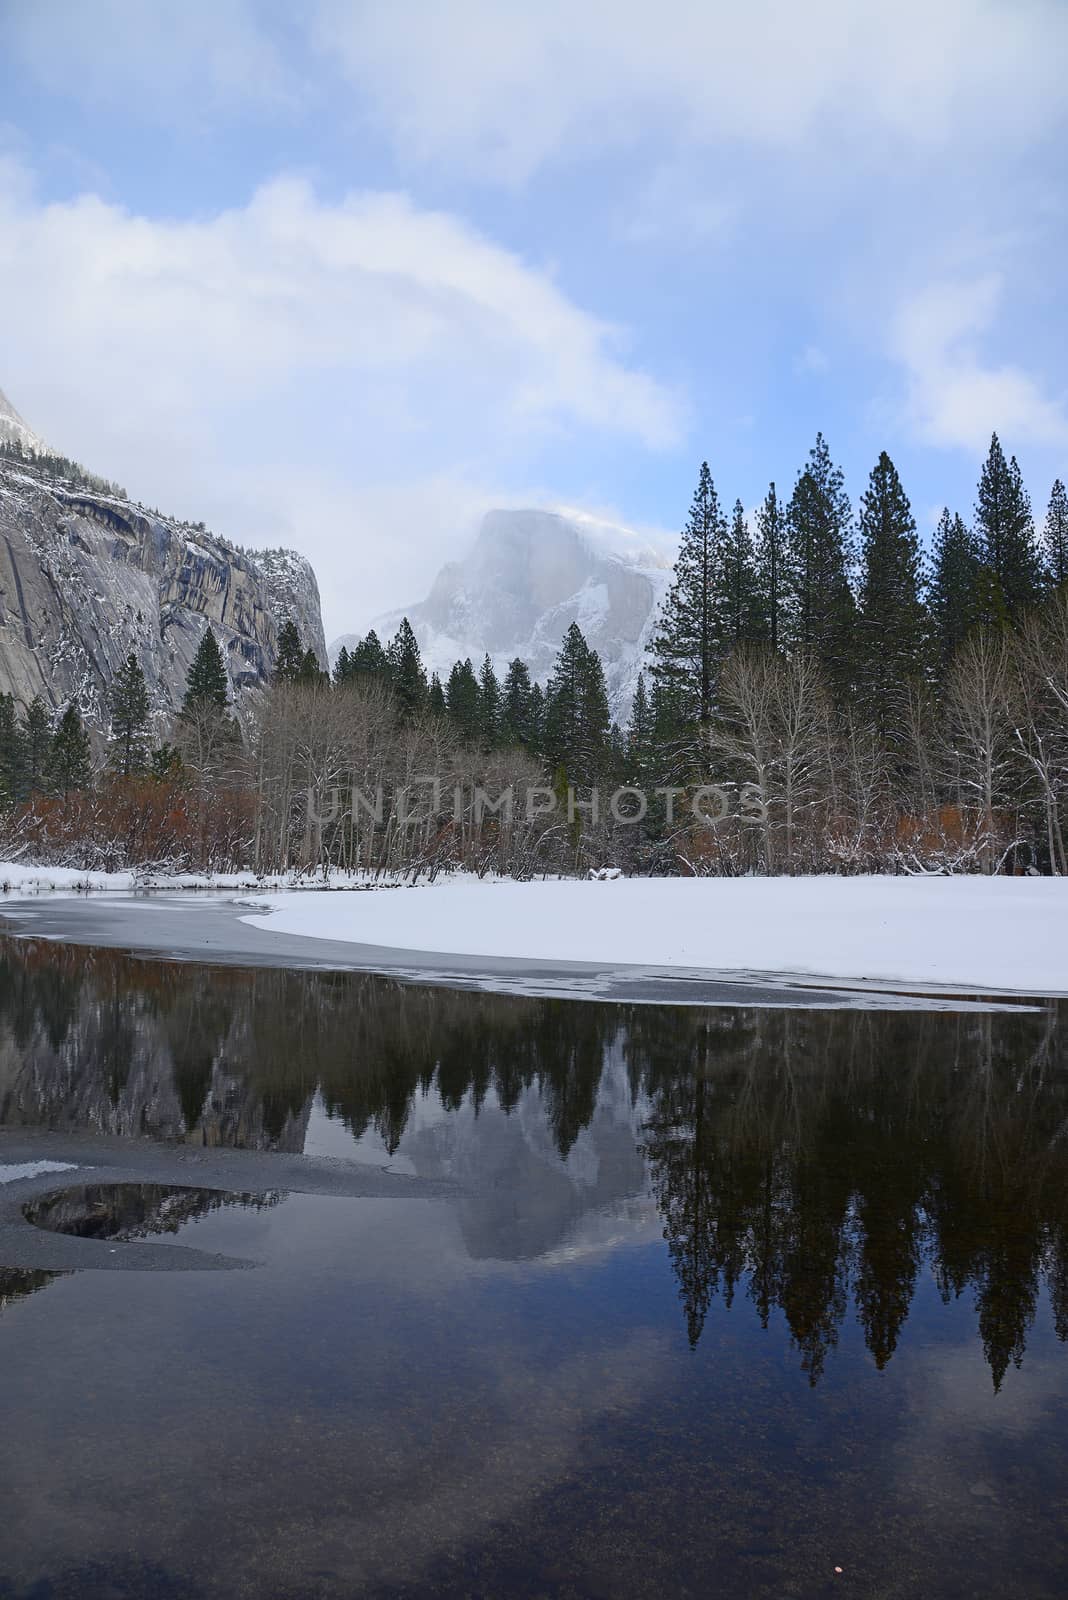 half dome after snow storm in yosemite national park